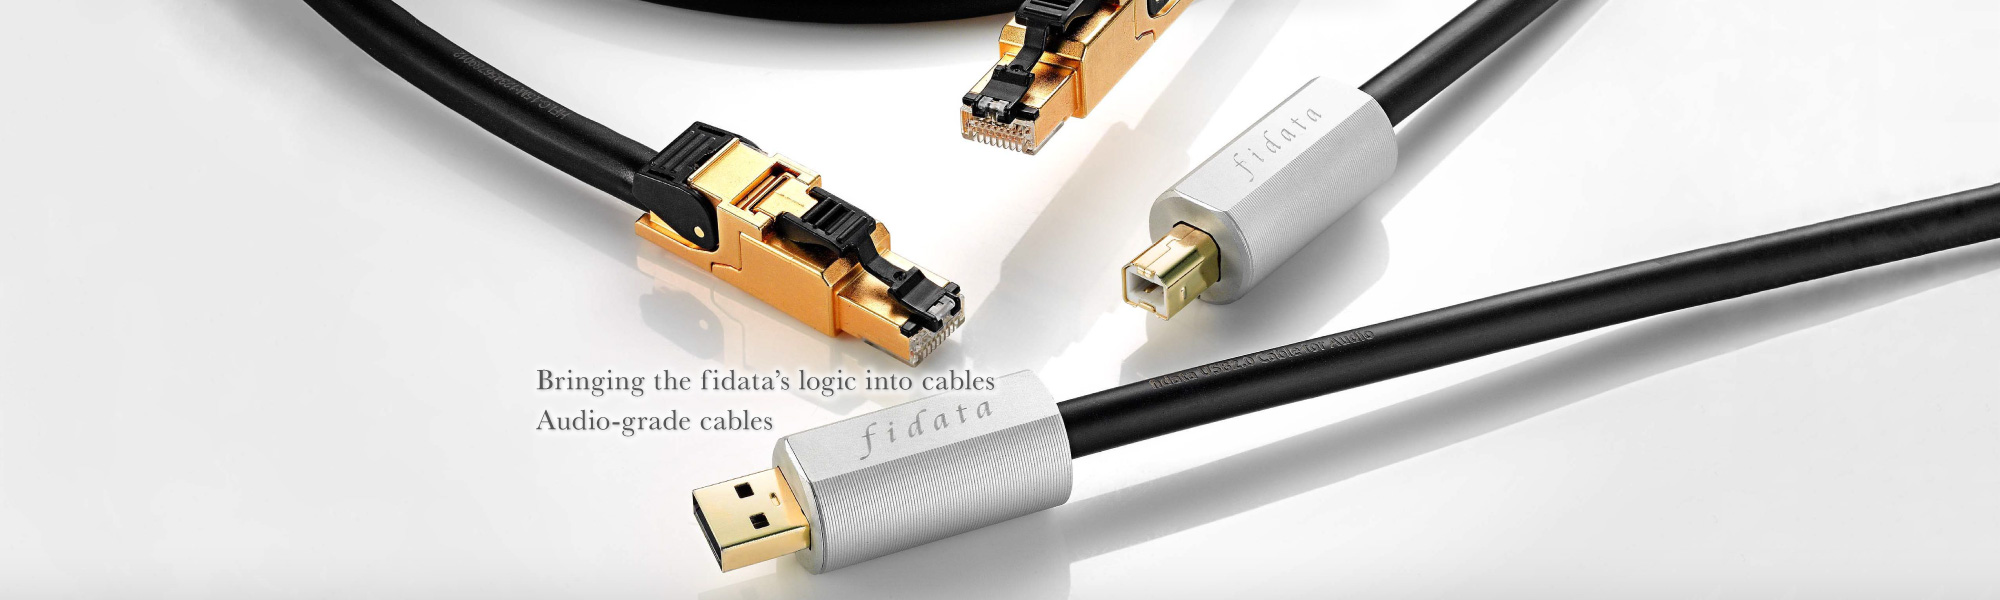 Bringing the ﬁdata’s logic into cables Audio-grade cables